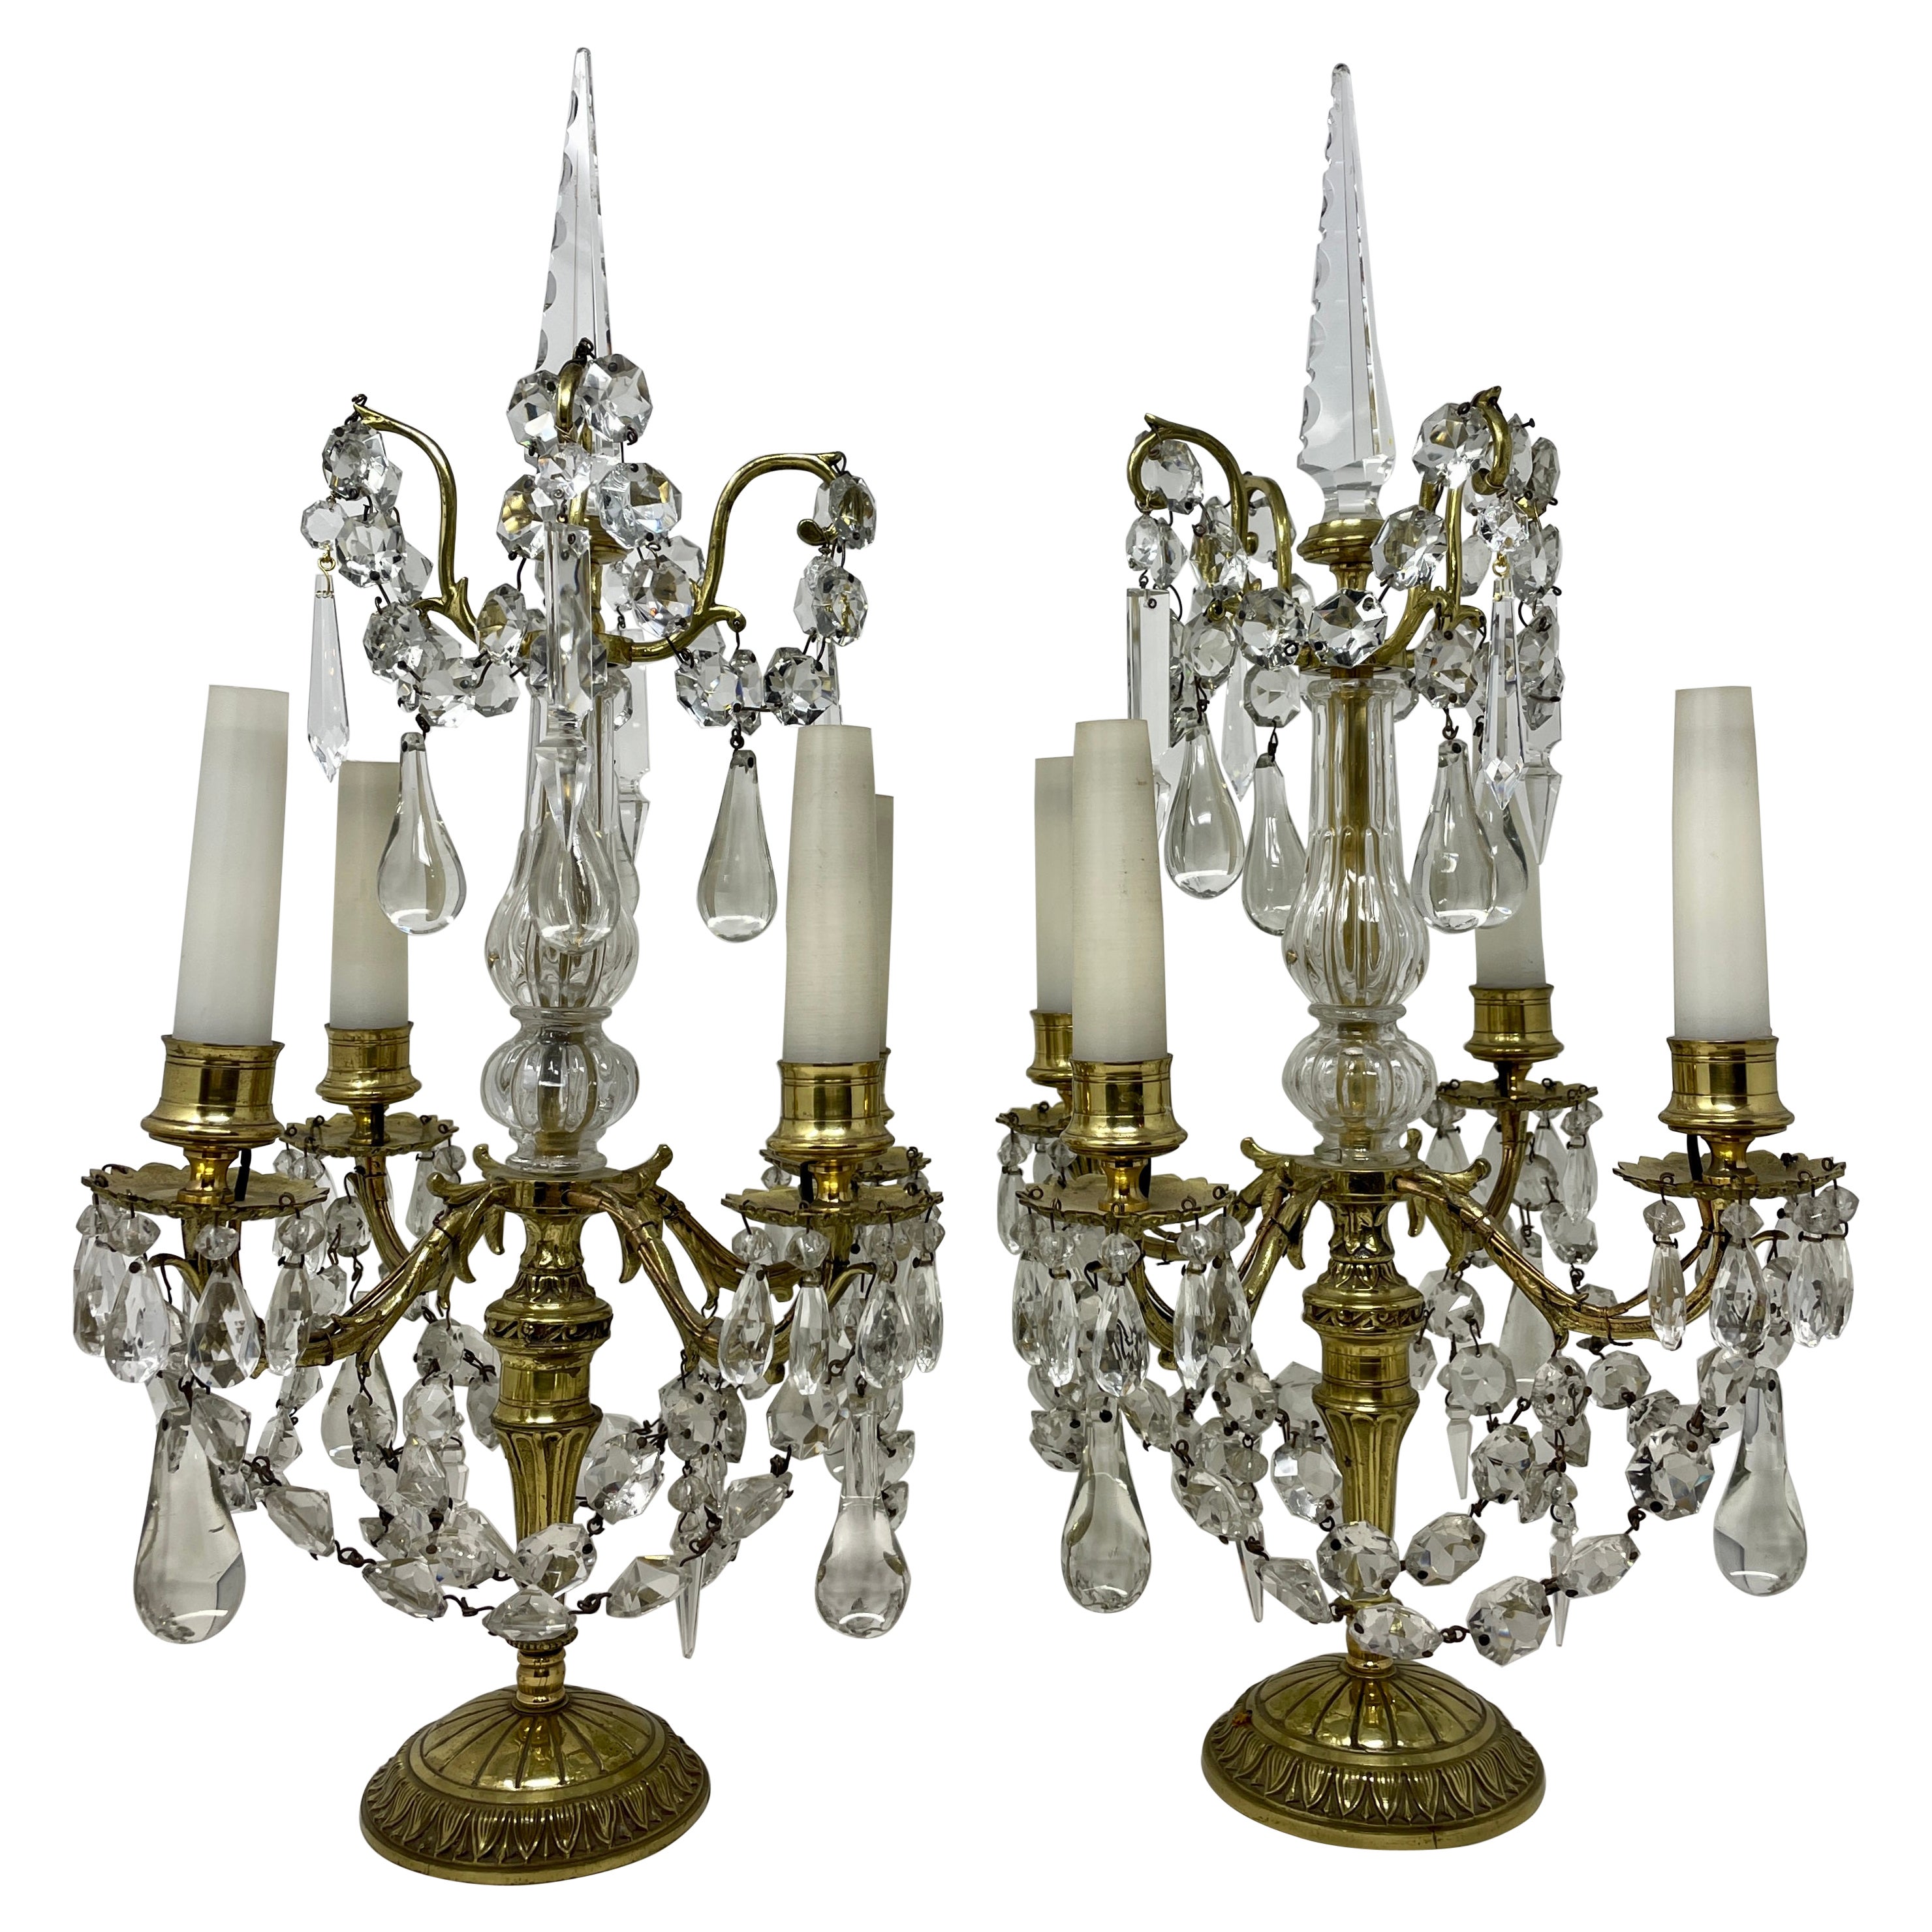 Pair Antique French Gold Bronze and Crystal Girandoles Candelabras, Circa 1890. For Sale